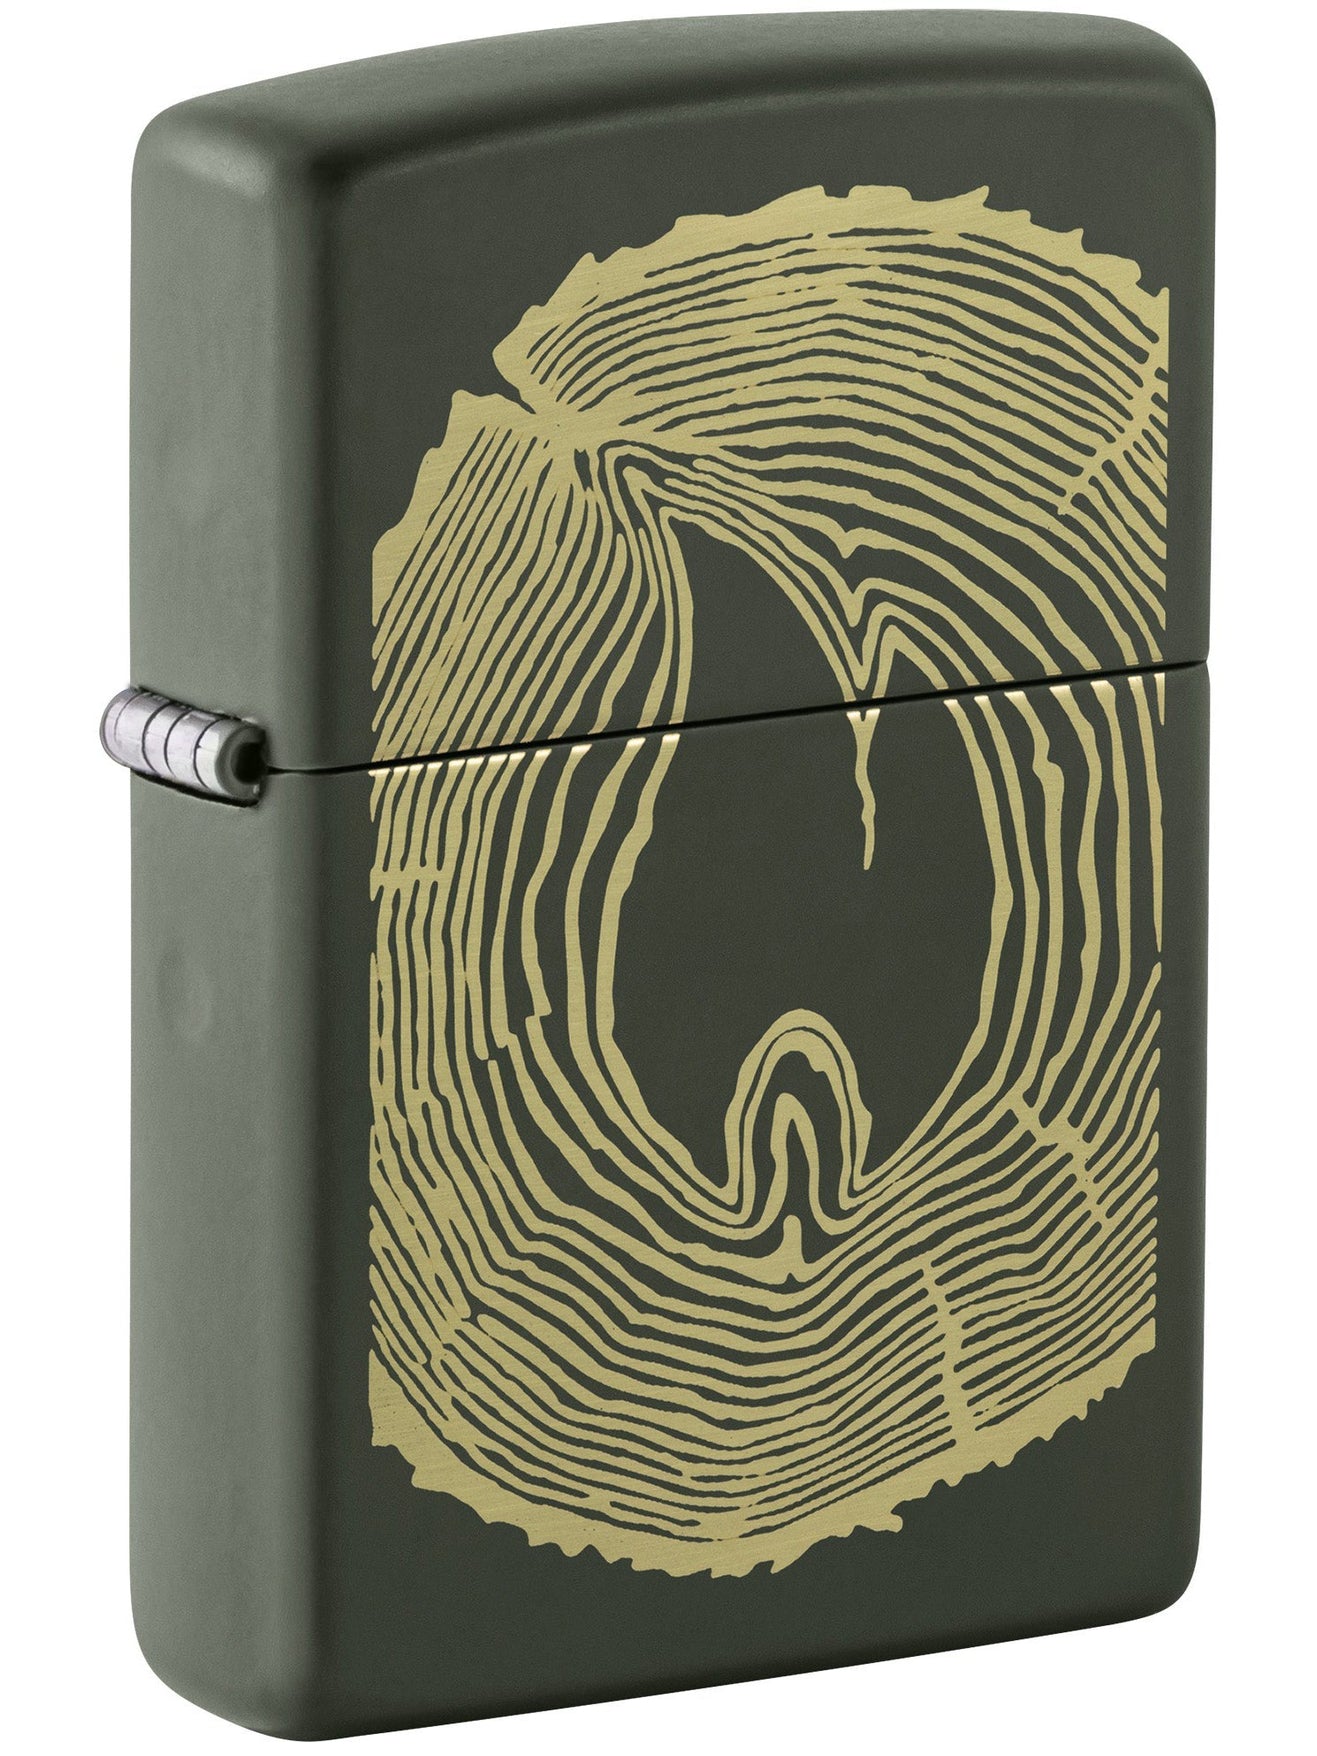 Zippo Lighter: Wood Rings with Flame, Engraved - Green Matte 48959